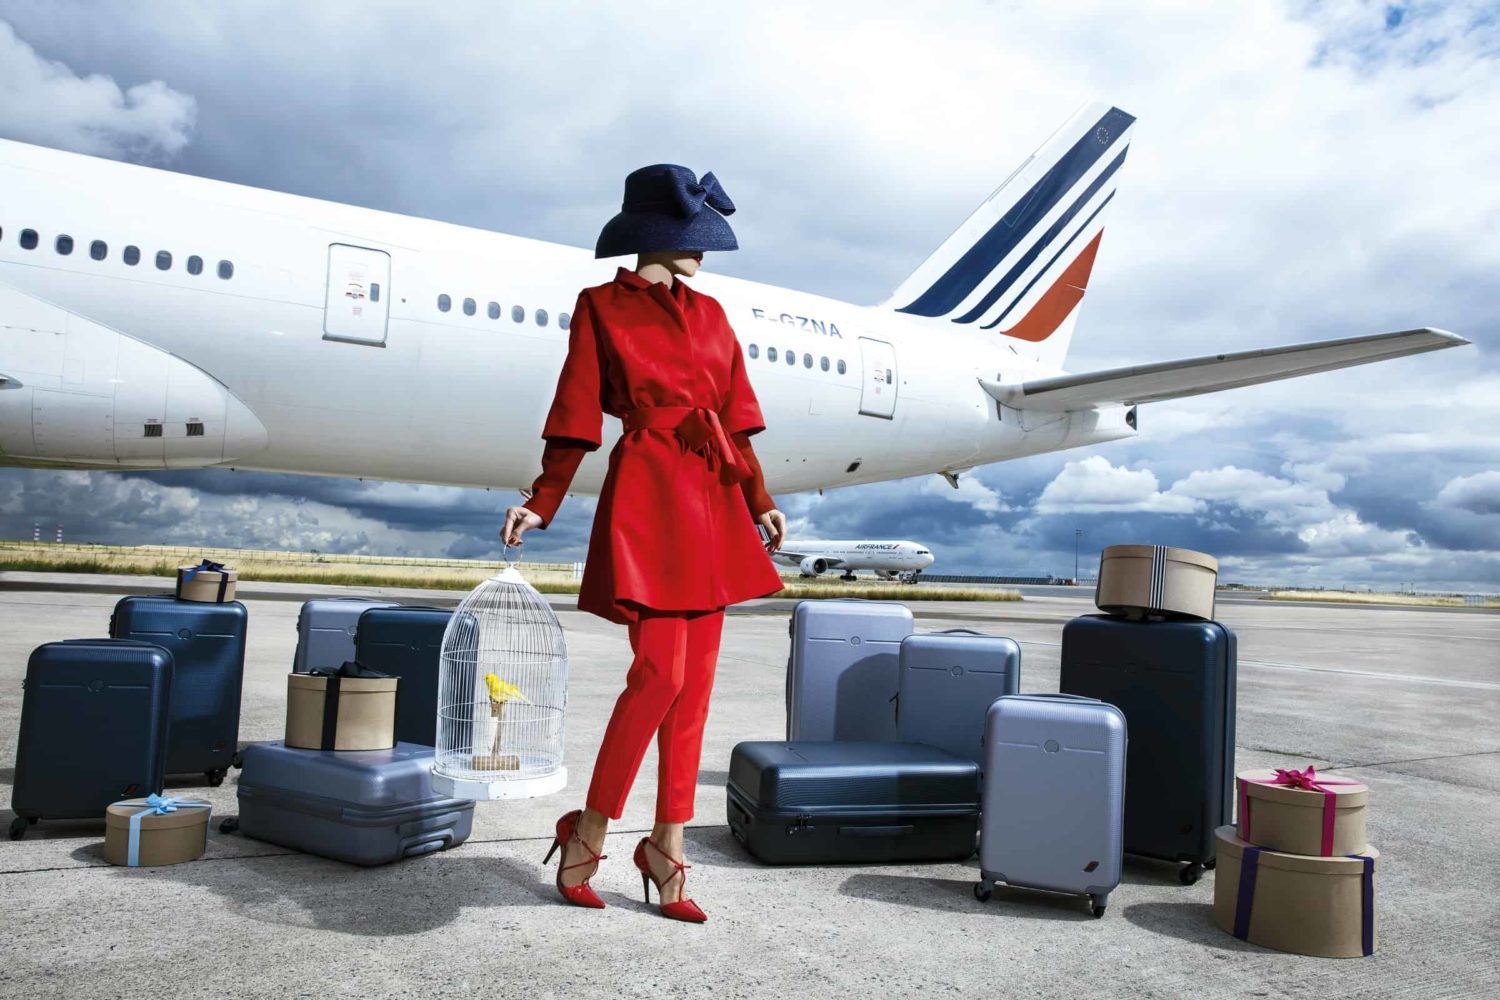 corporate air france image for plane